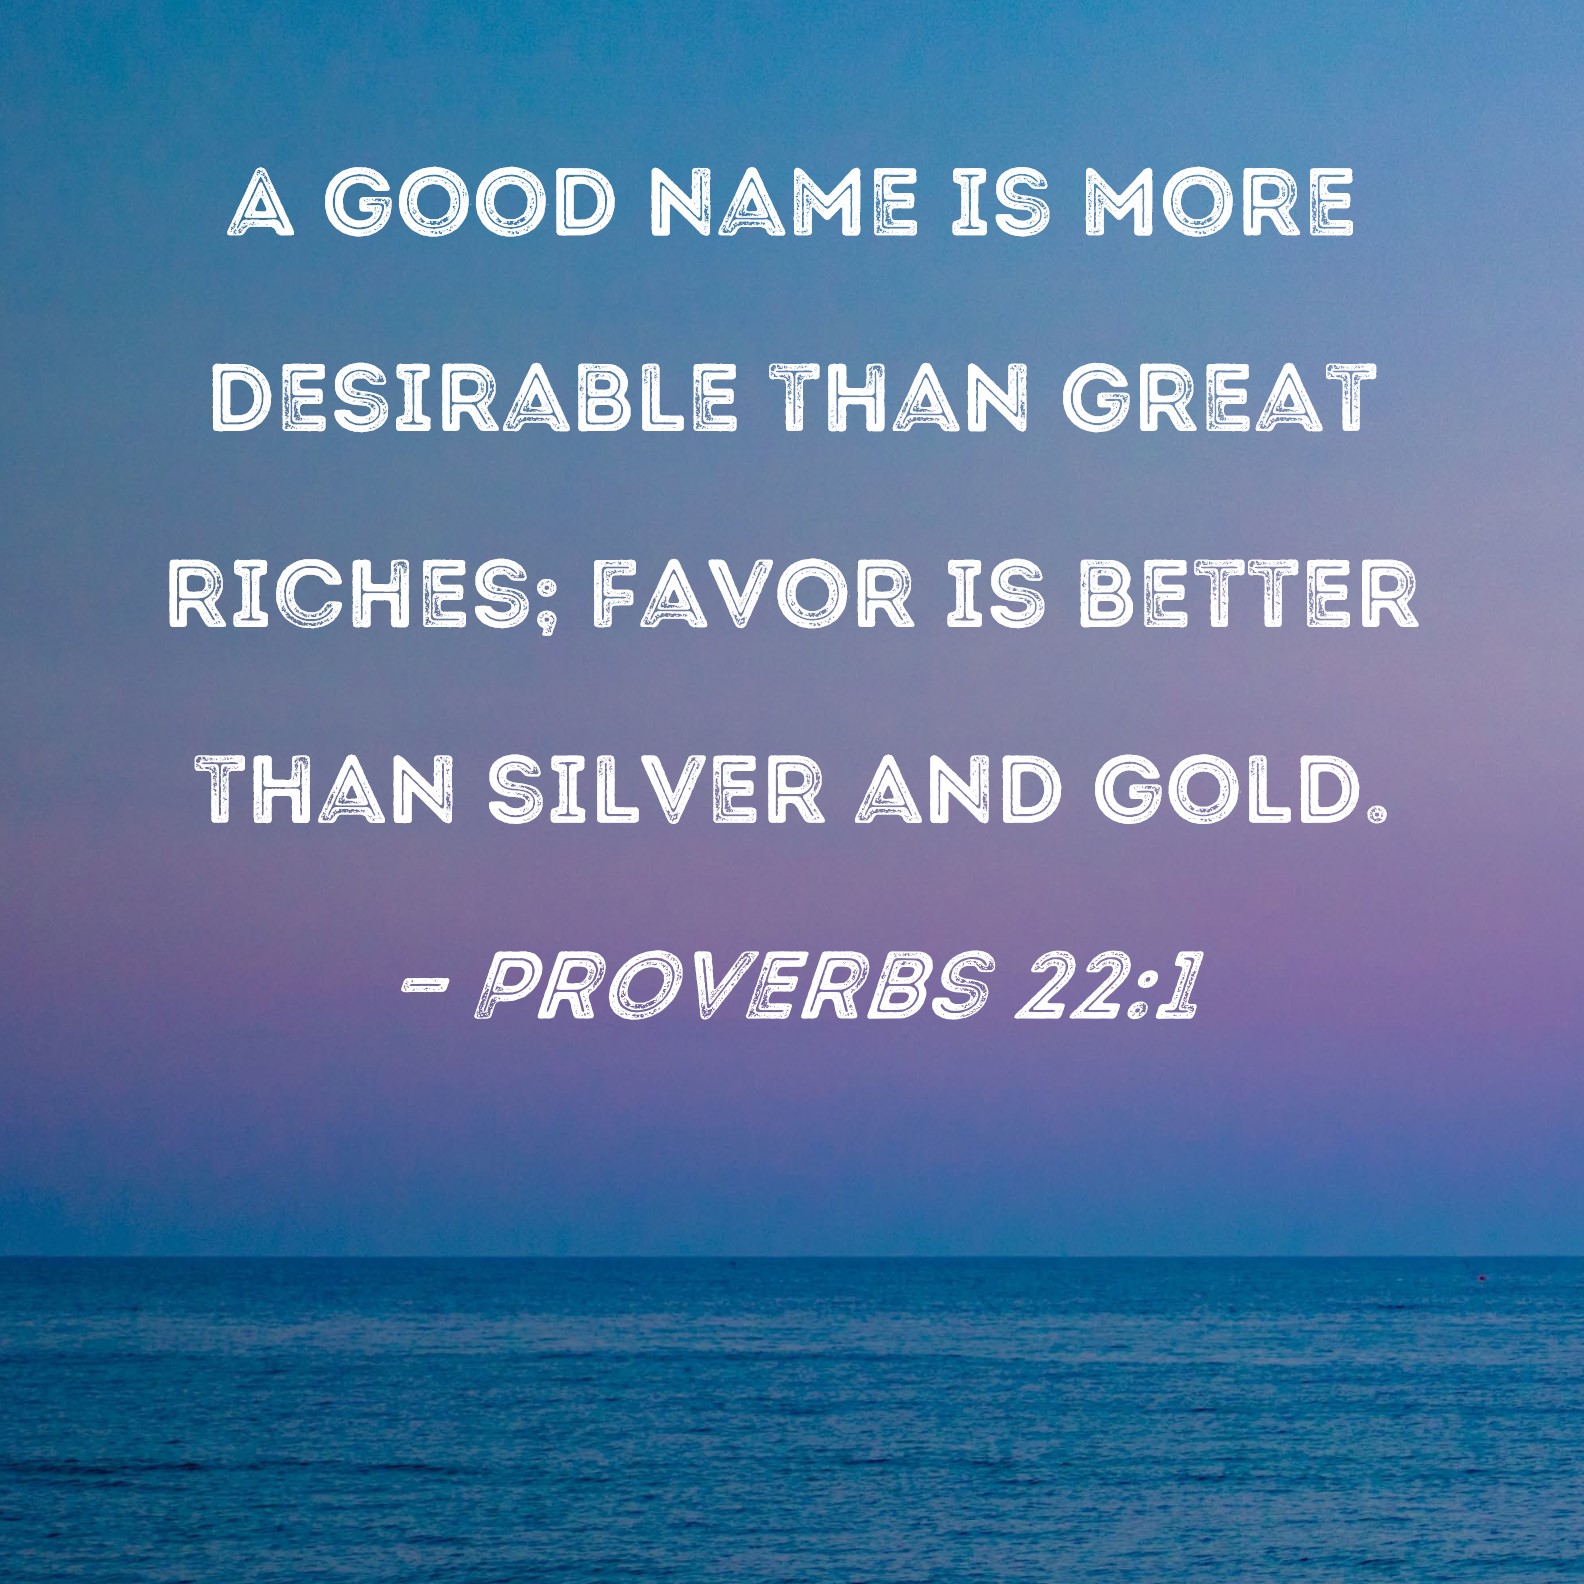 Proverbs 22:1 A good name is more desirable than great riches; favor is  better than silver and gold.